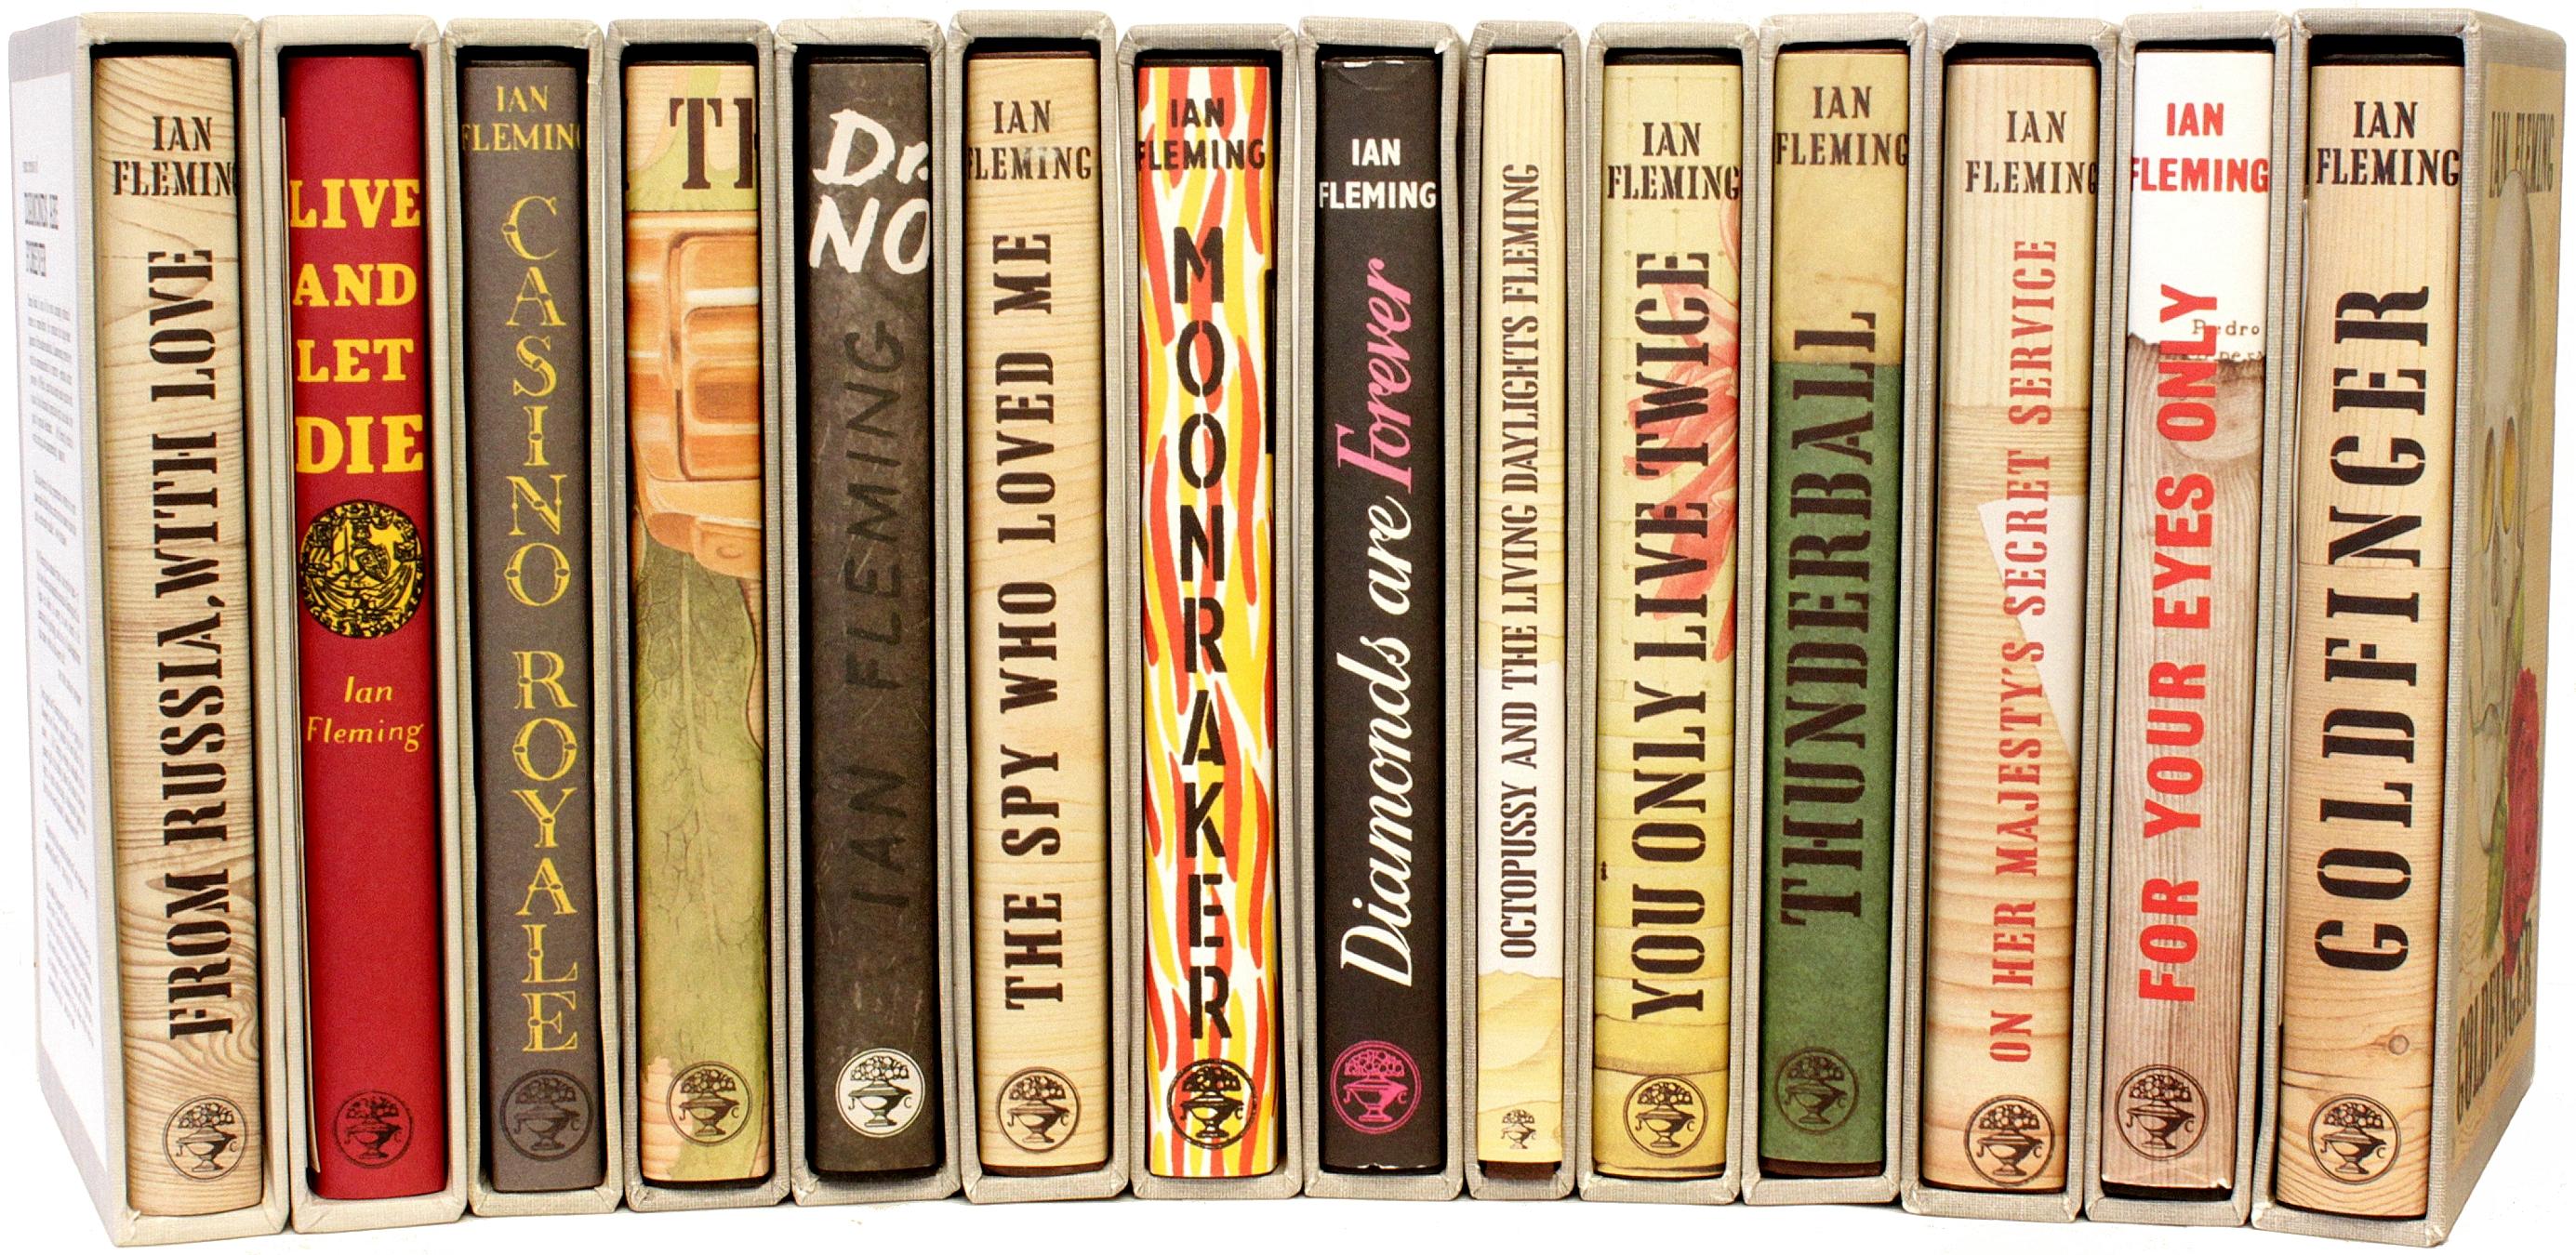 Late 20th Century James Bond Series by Ian Fleming, Facsimile First Edition Library, 14 Volumes